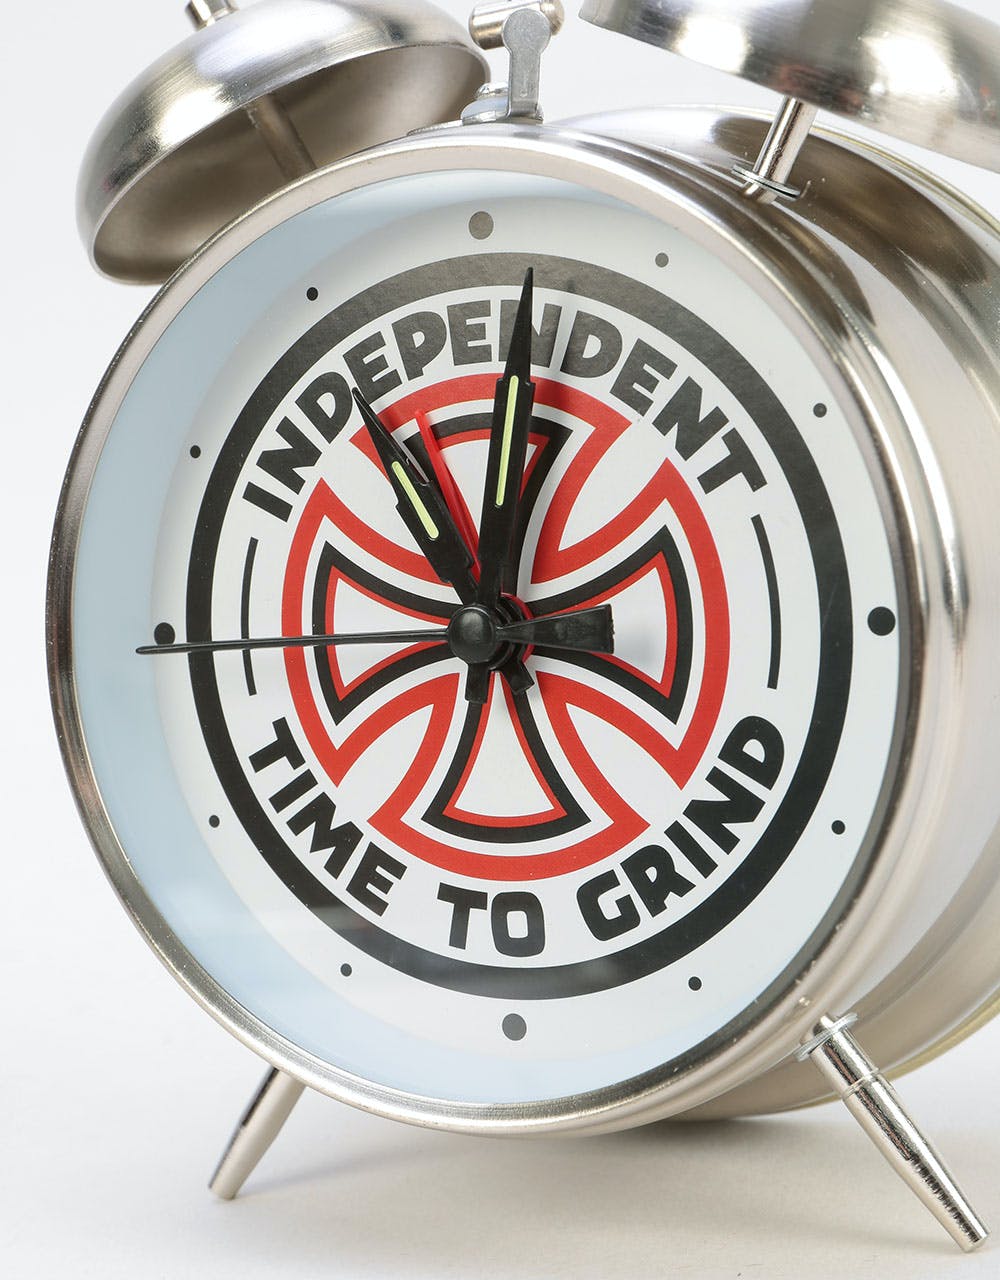 Independent Time to Grind Alarm Clock - Silver